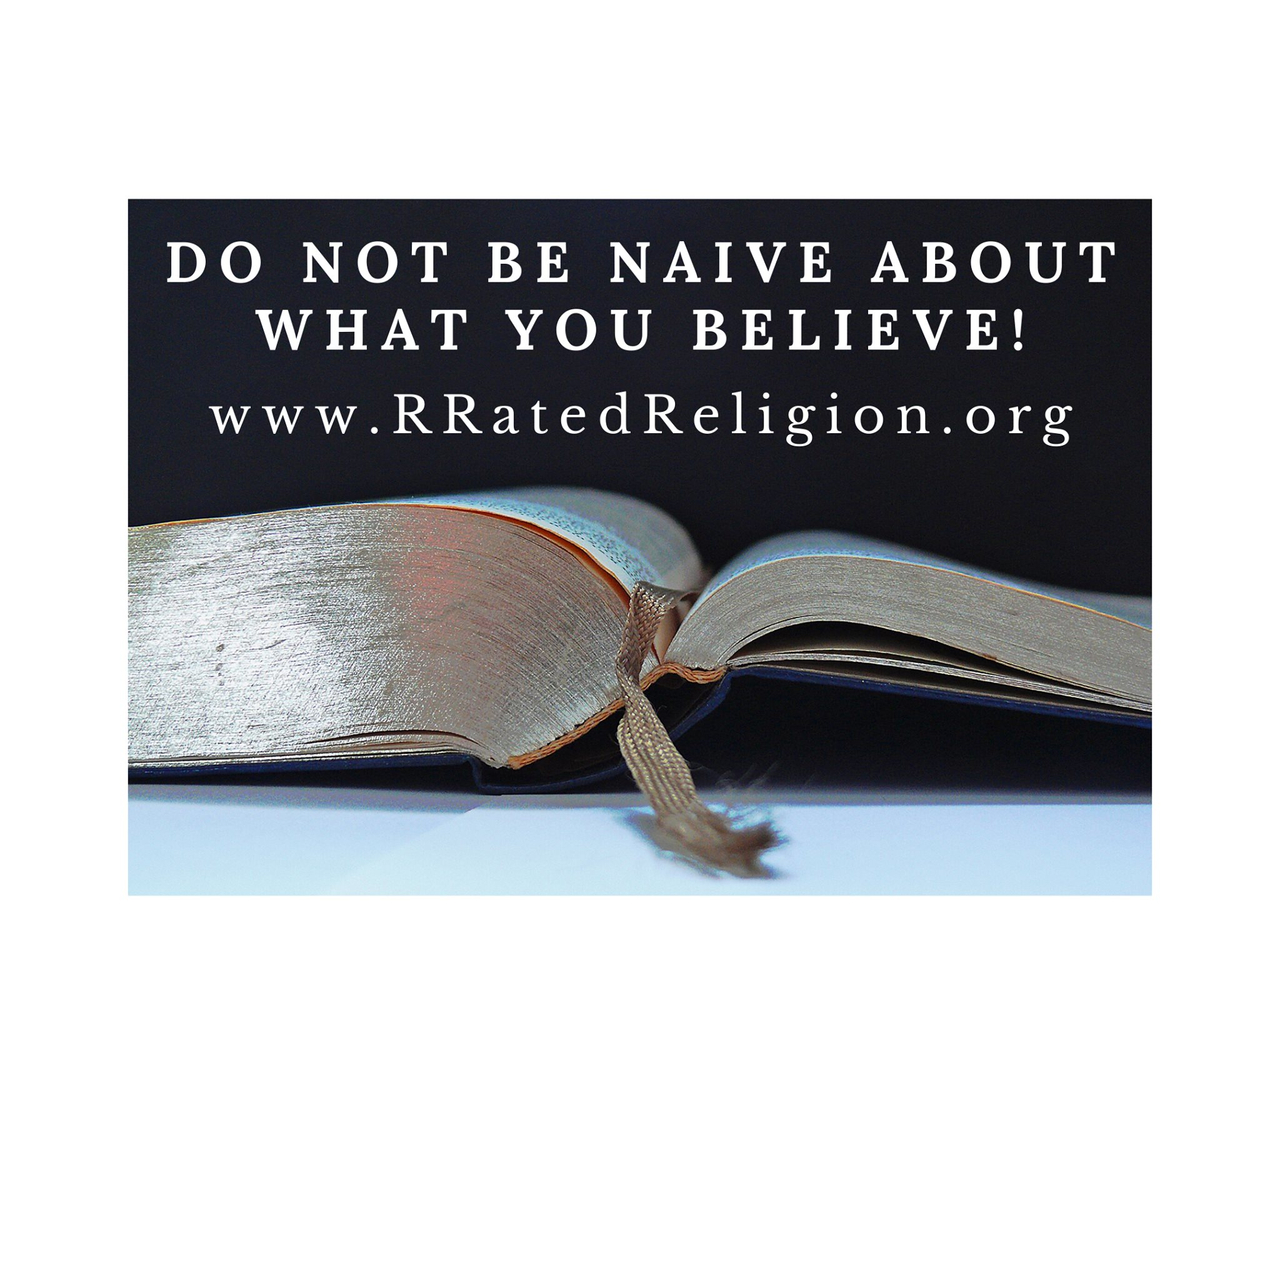 R-Rated Religion’s Newsletter